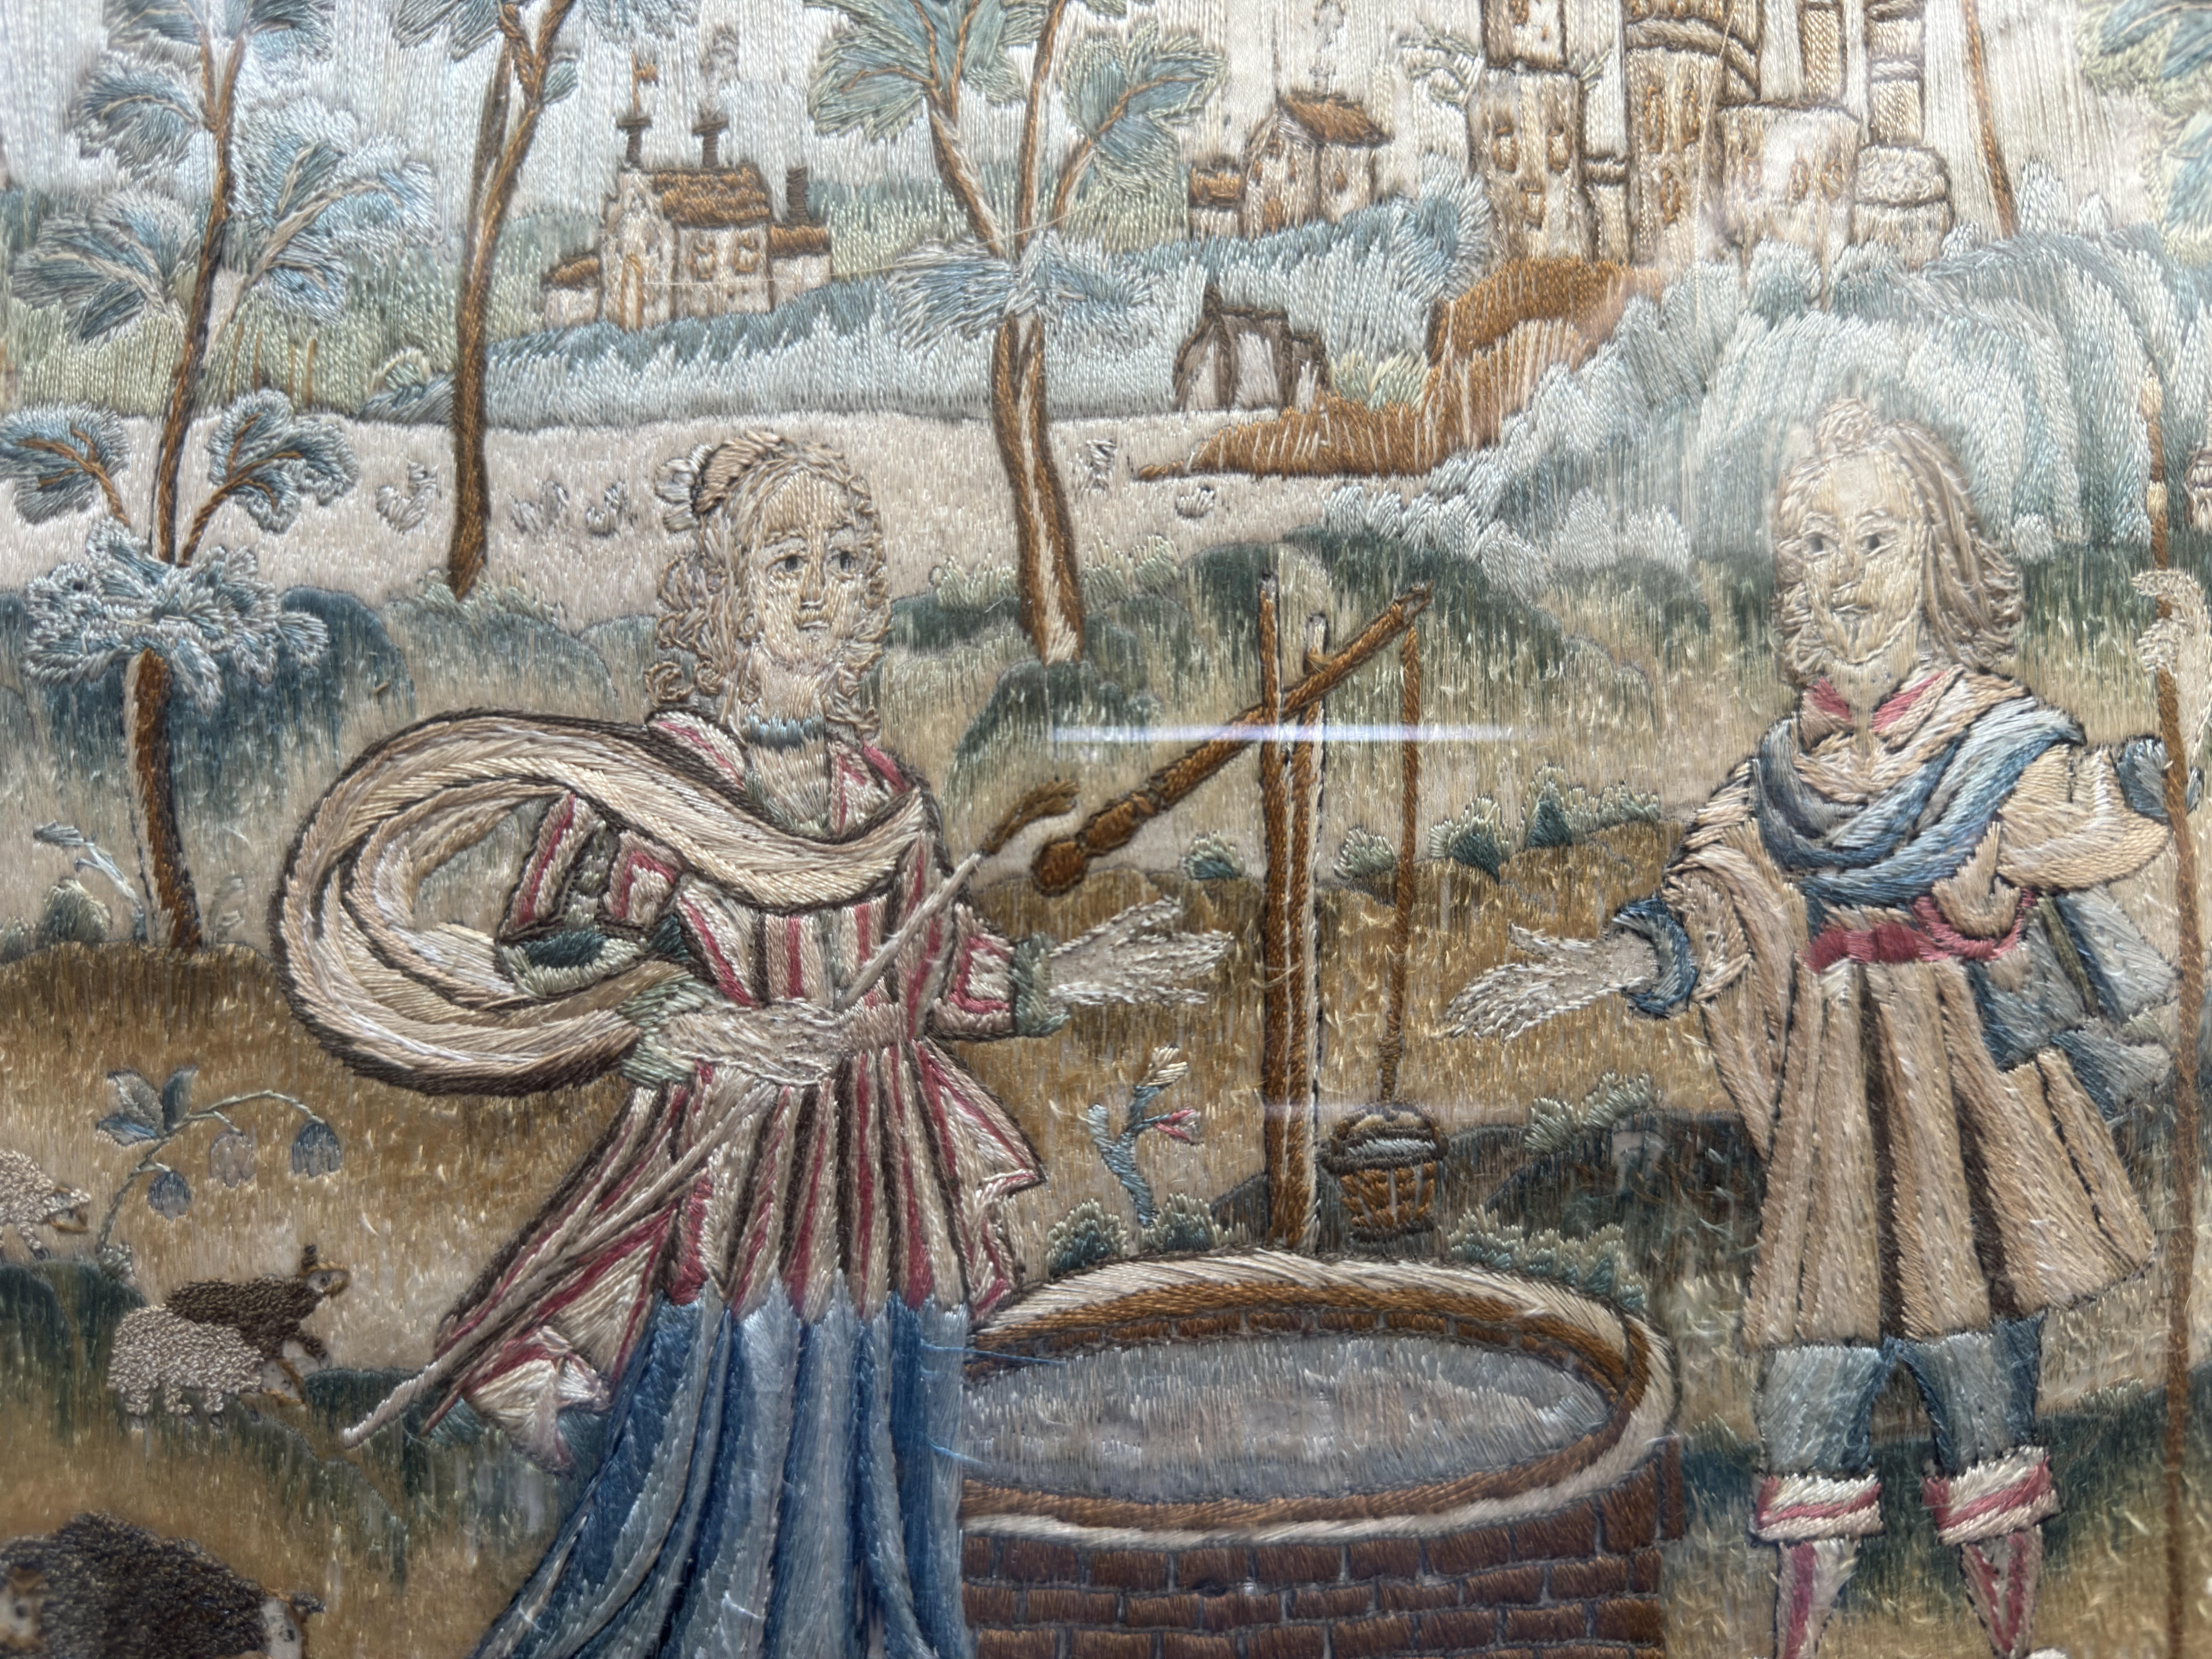 Seventeenth century handstitched silk embroidery of a couple by a well, 11 x 15 inches.